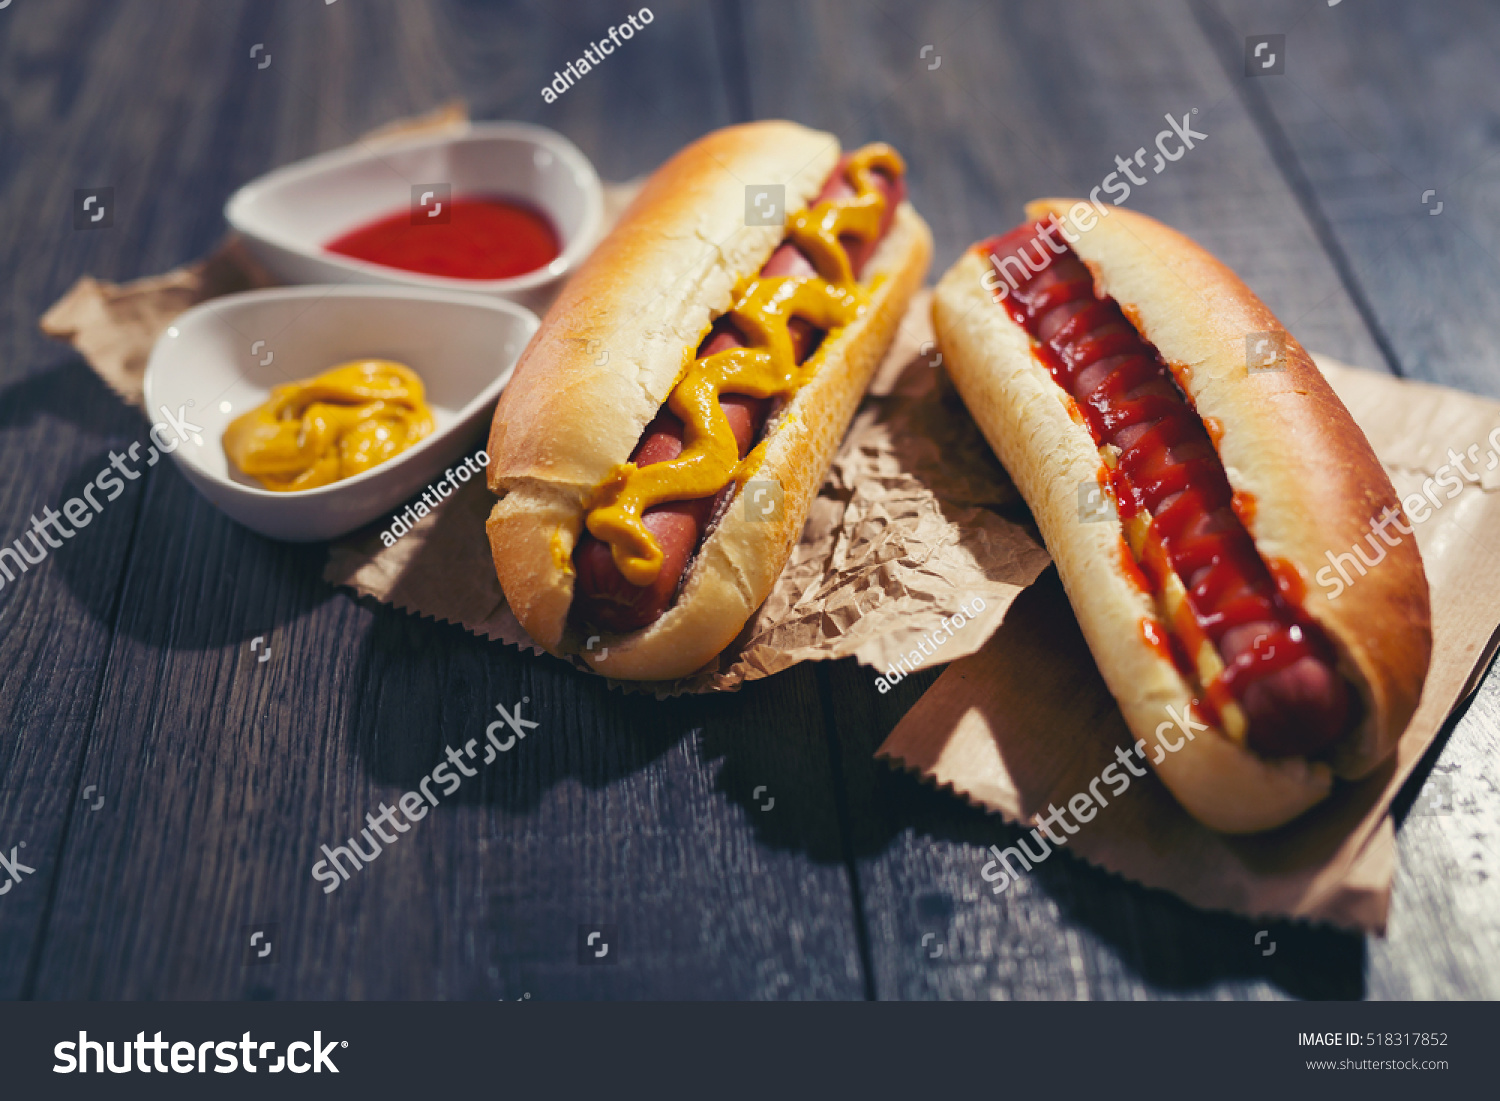 Tasty hot dogs on paper on wooden background #518317852